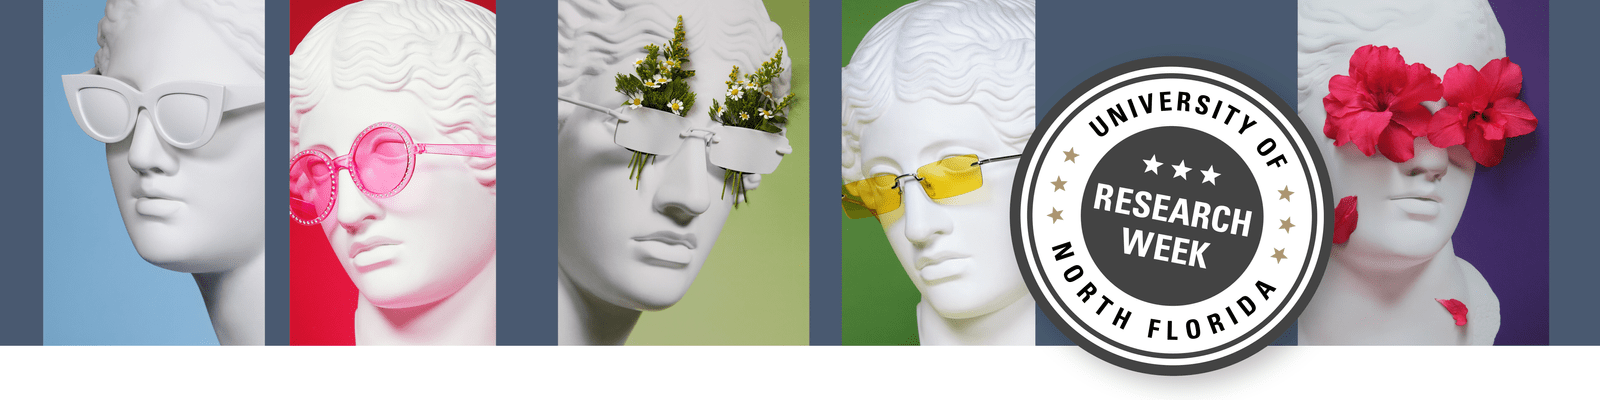 five statues in sunglasses and univeristy of north florida research week logo